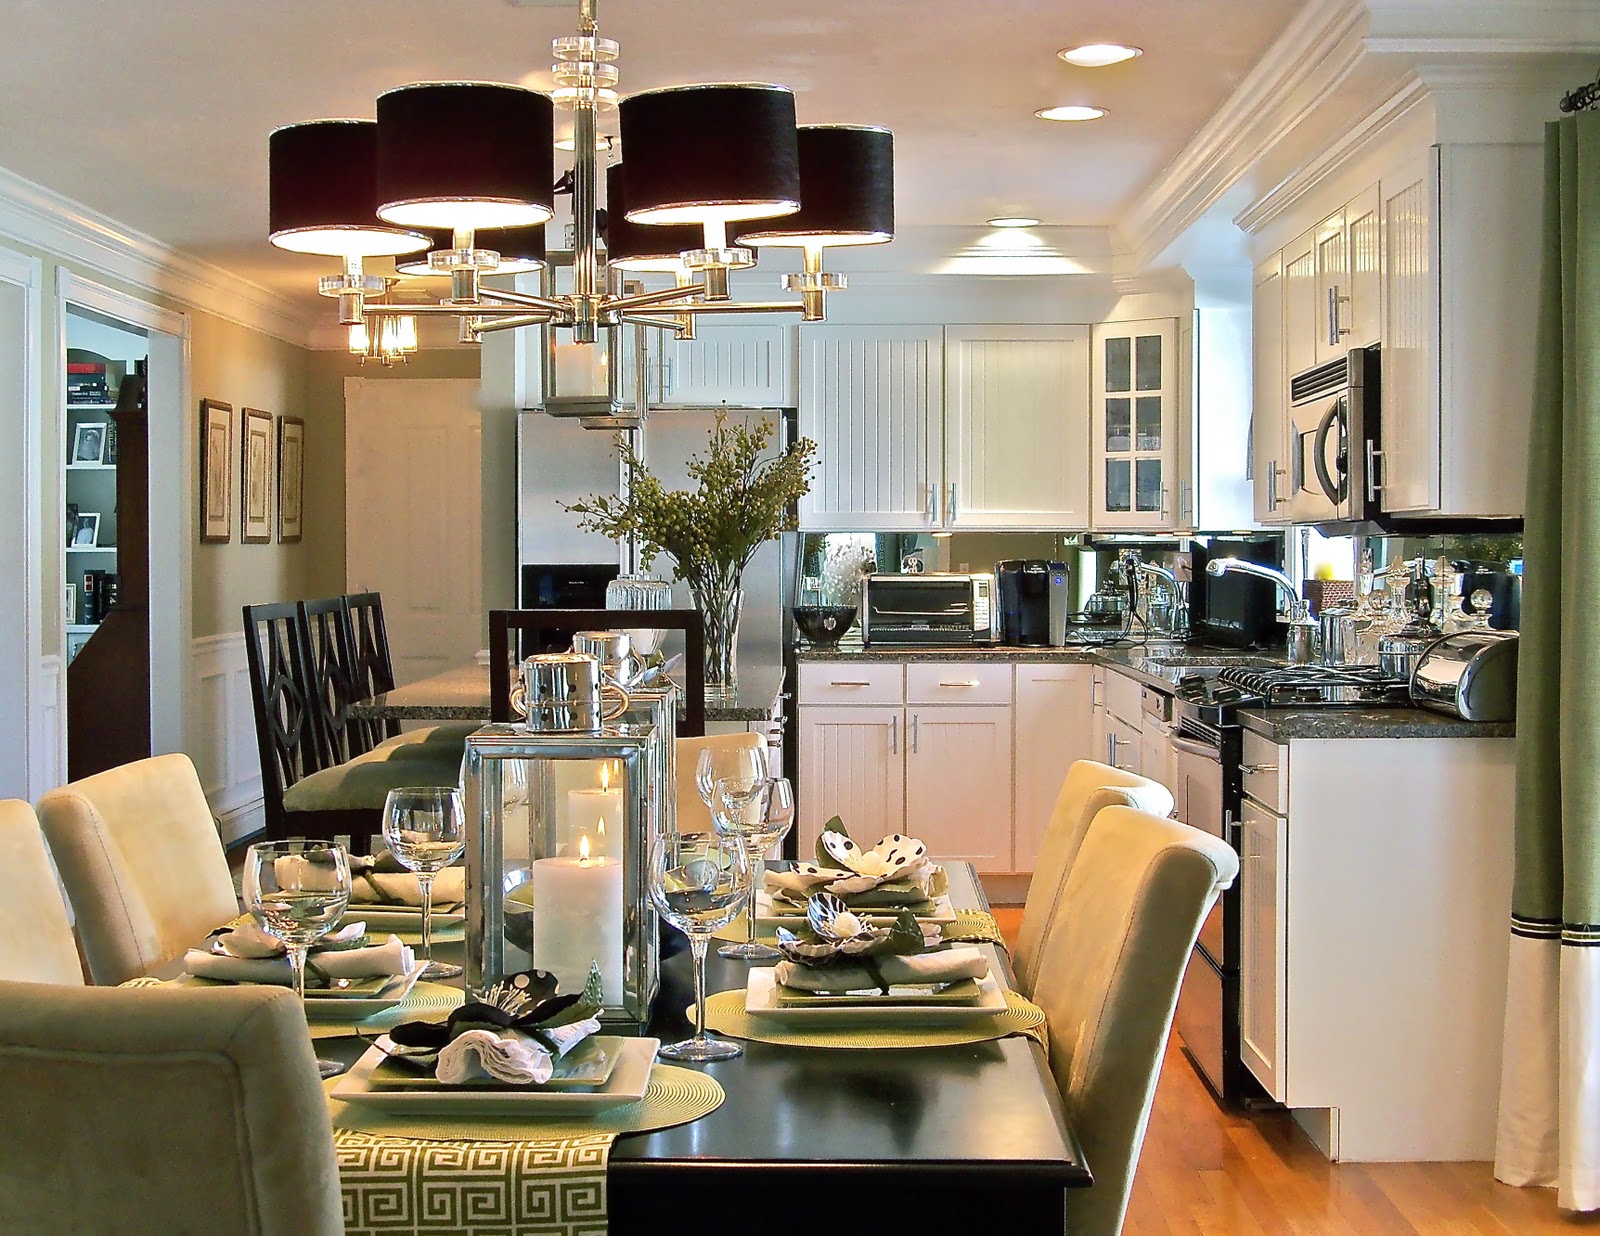 Formal Dining The Comfortable Formal Dining Room Near The Kitchen With Wide Island And Black Stools Near White Drawers Dining Room  Dining Room Interior Providing Best Dinner Experience 